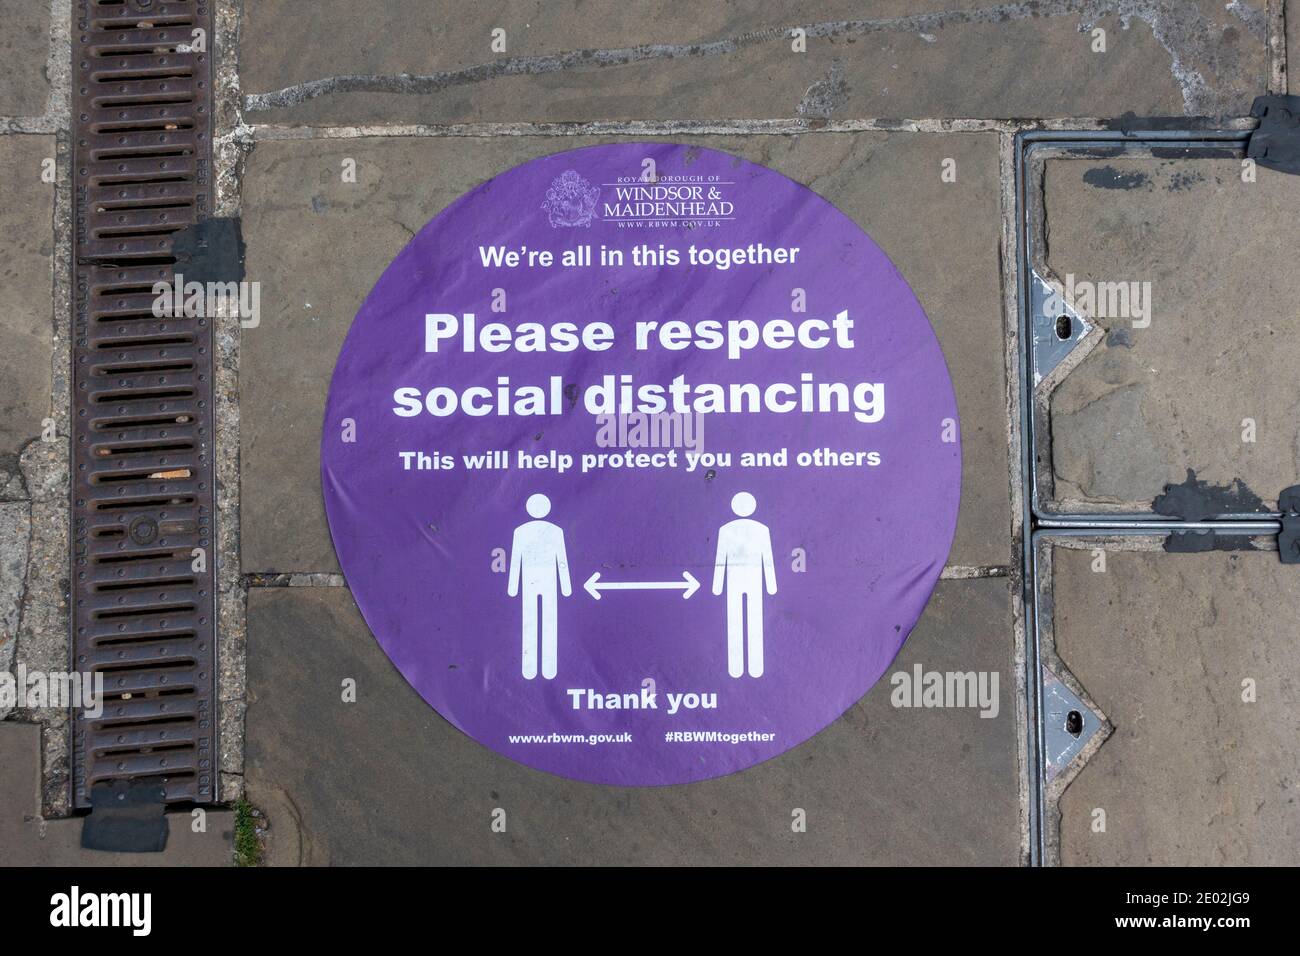 'Please Respect social distancing' sign on the ground reminding people to socially distance during the 2020 Covid-19 pandemic, Windsor, Berkshire, UK. Stock Photo